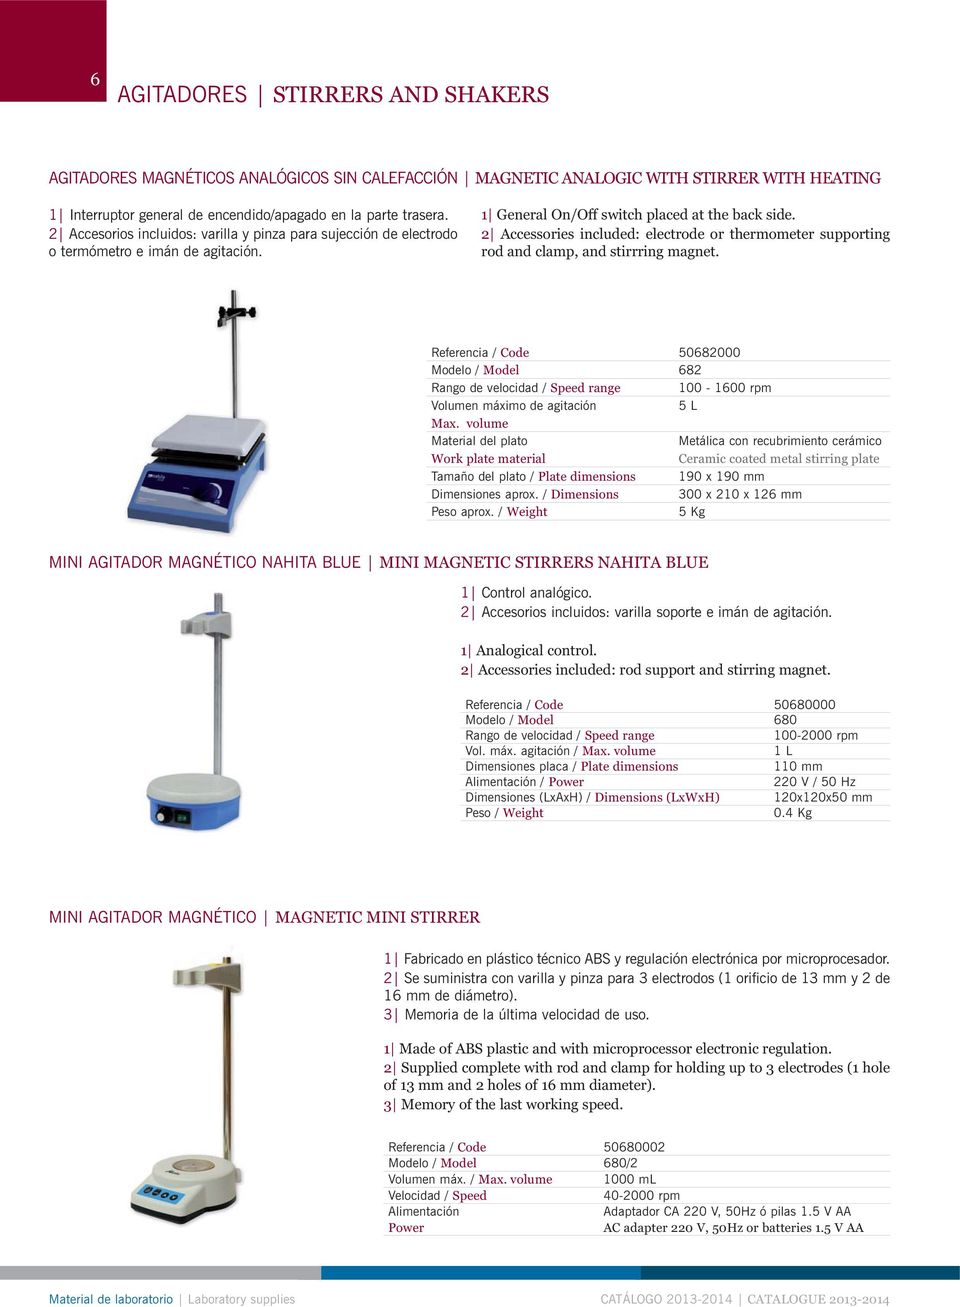 2 Accessories included: electrode or thermometer supporting rod and clamp, and stirrring magnet.